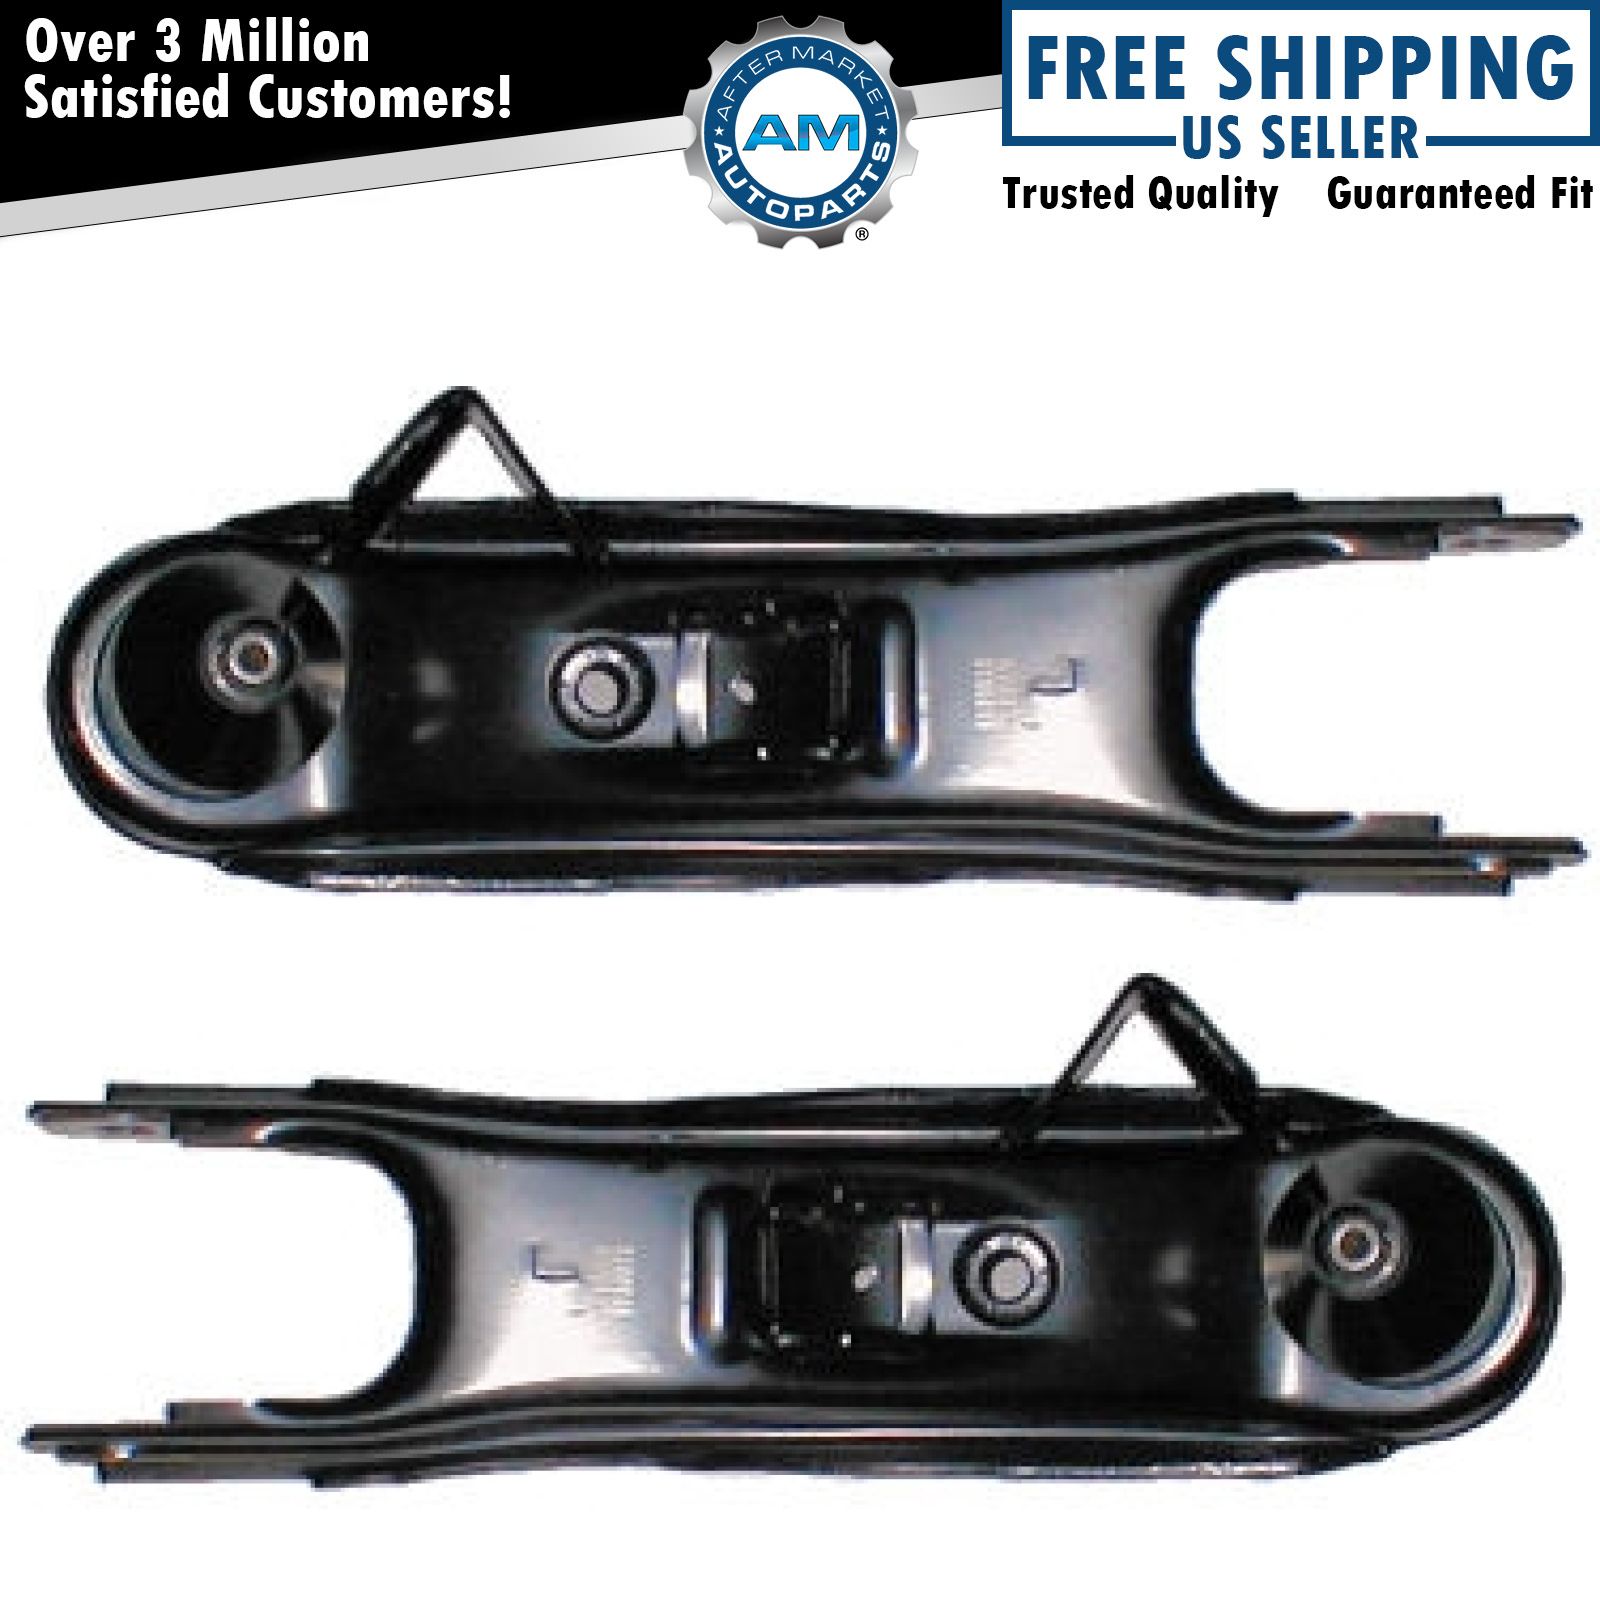 Lower Front Control Arm Pair for 86-97 Nissan Pickup Truck D21 Hardbody